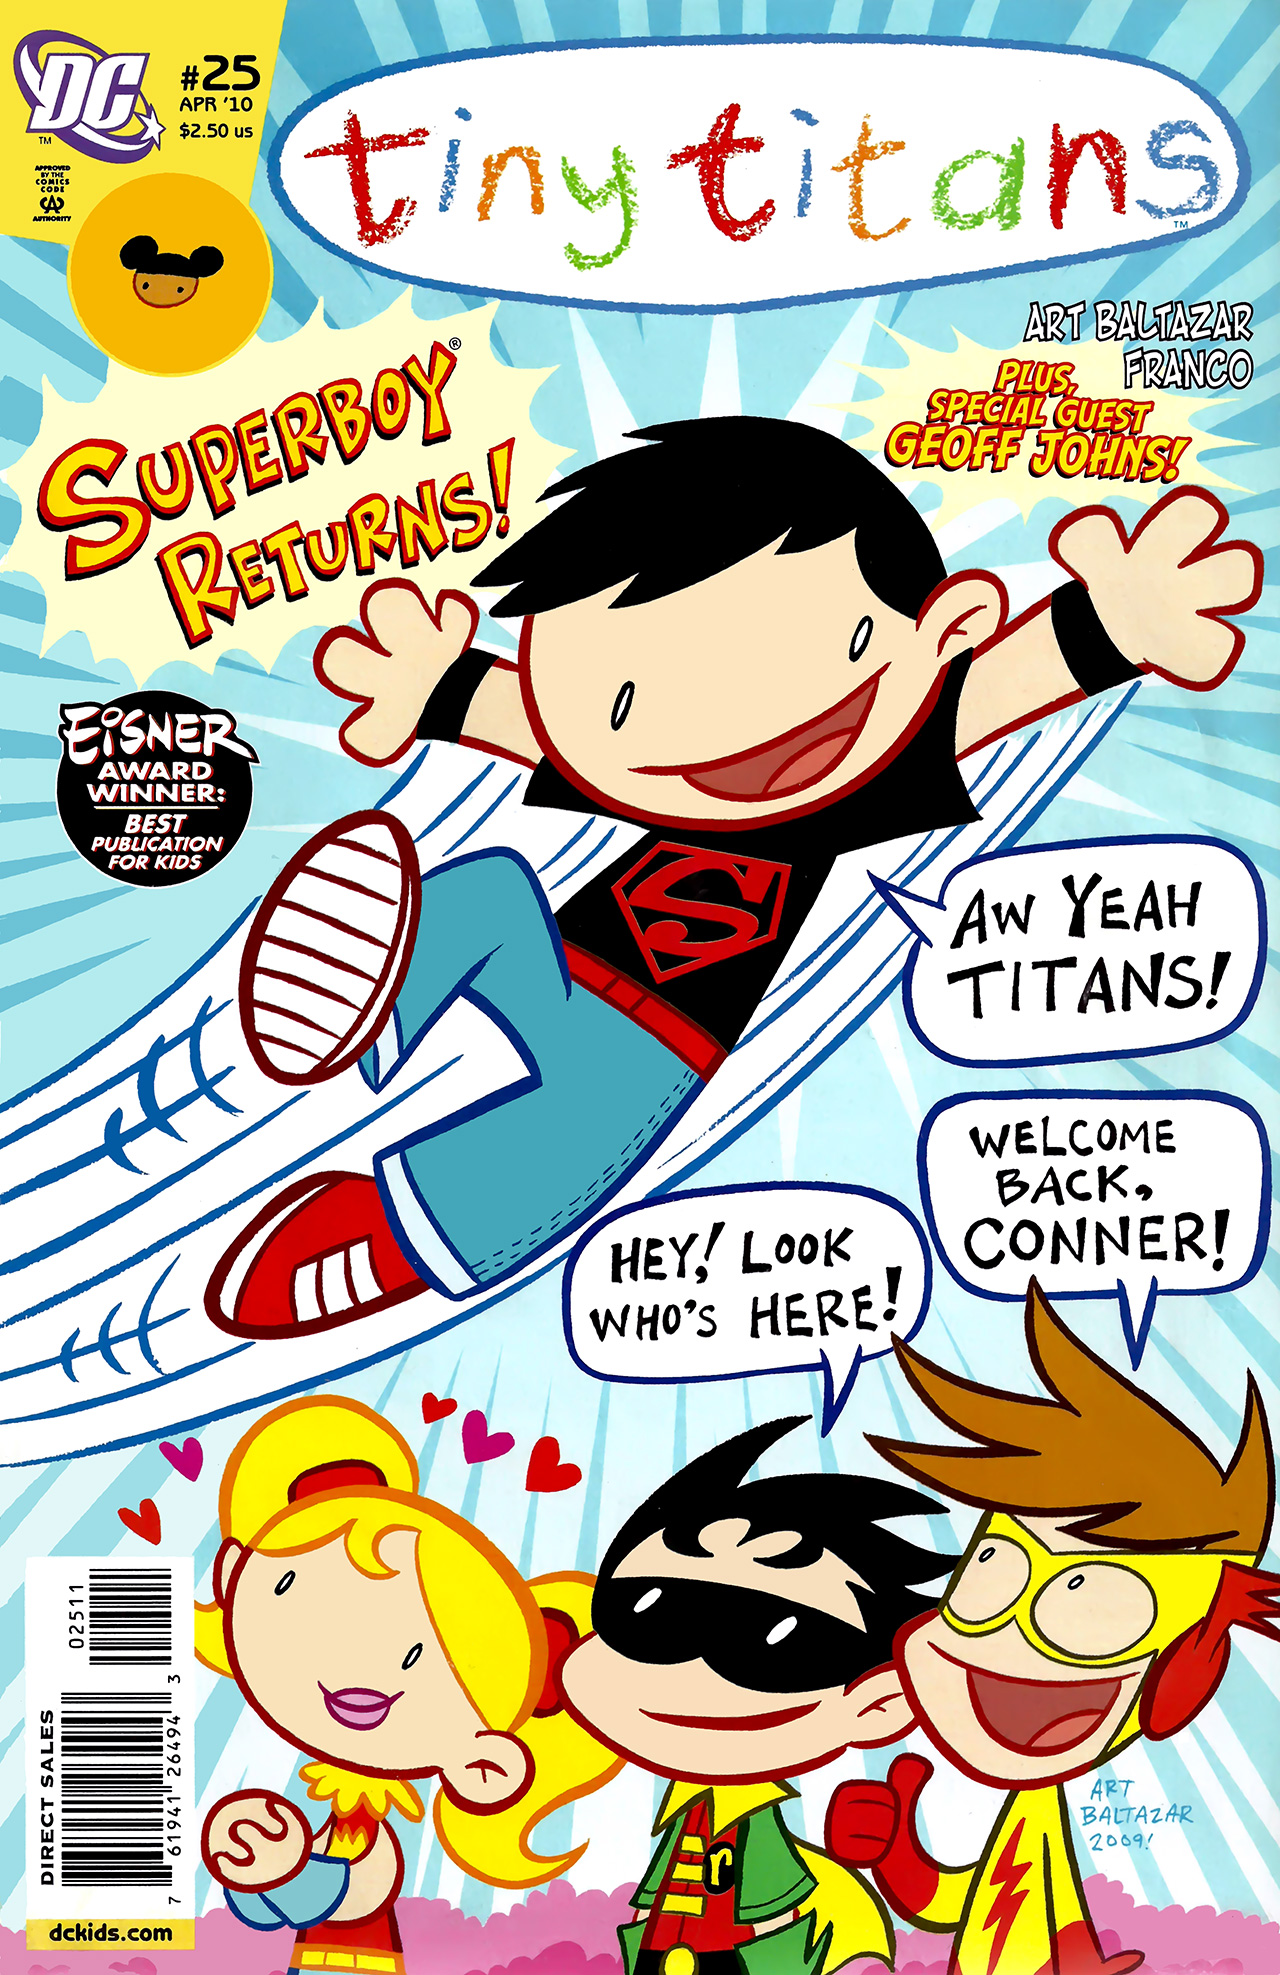 Tiny Titans Issue 25 | Read Tiny Titans Issue 25 comic online in high  quality. Read Full Comic online for free - Read comics online in high  quality .|